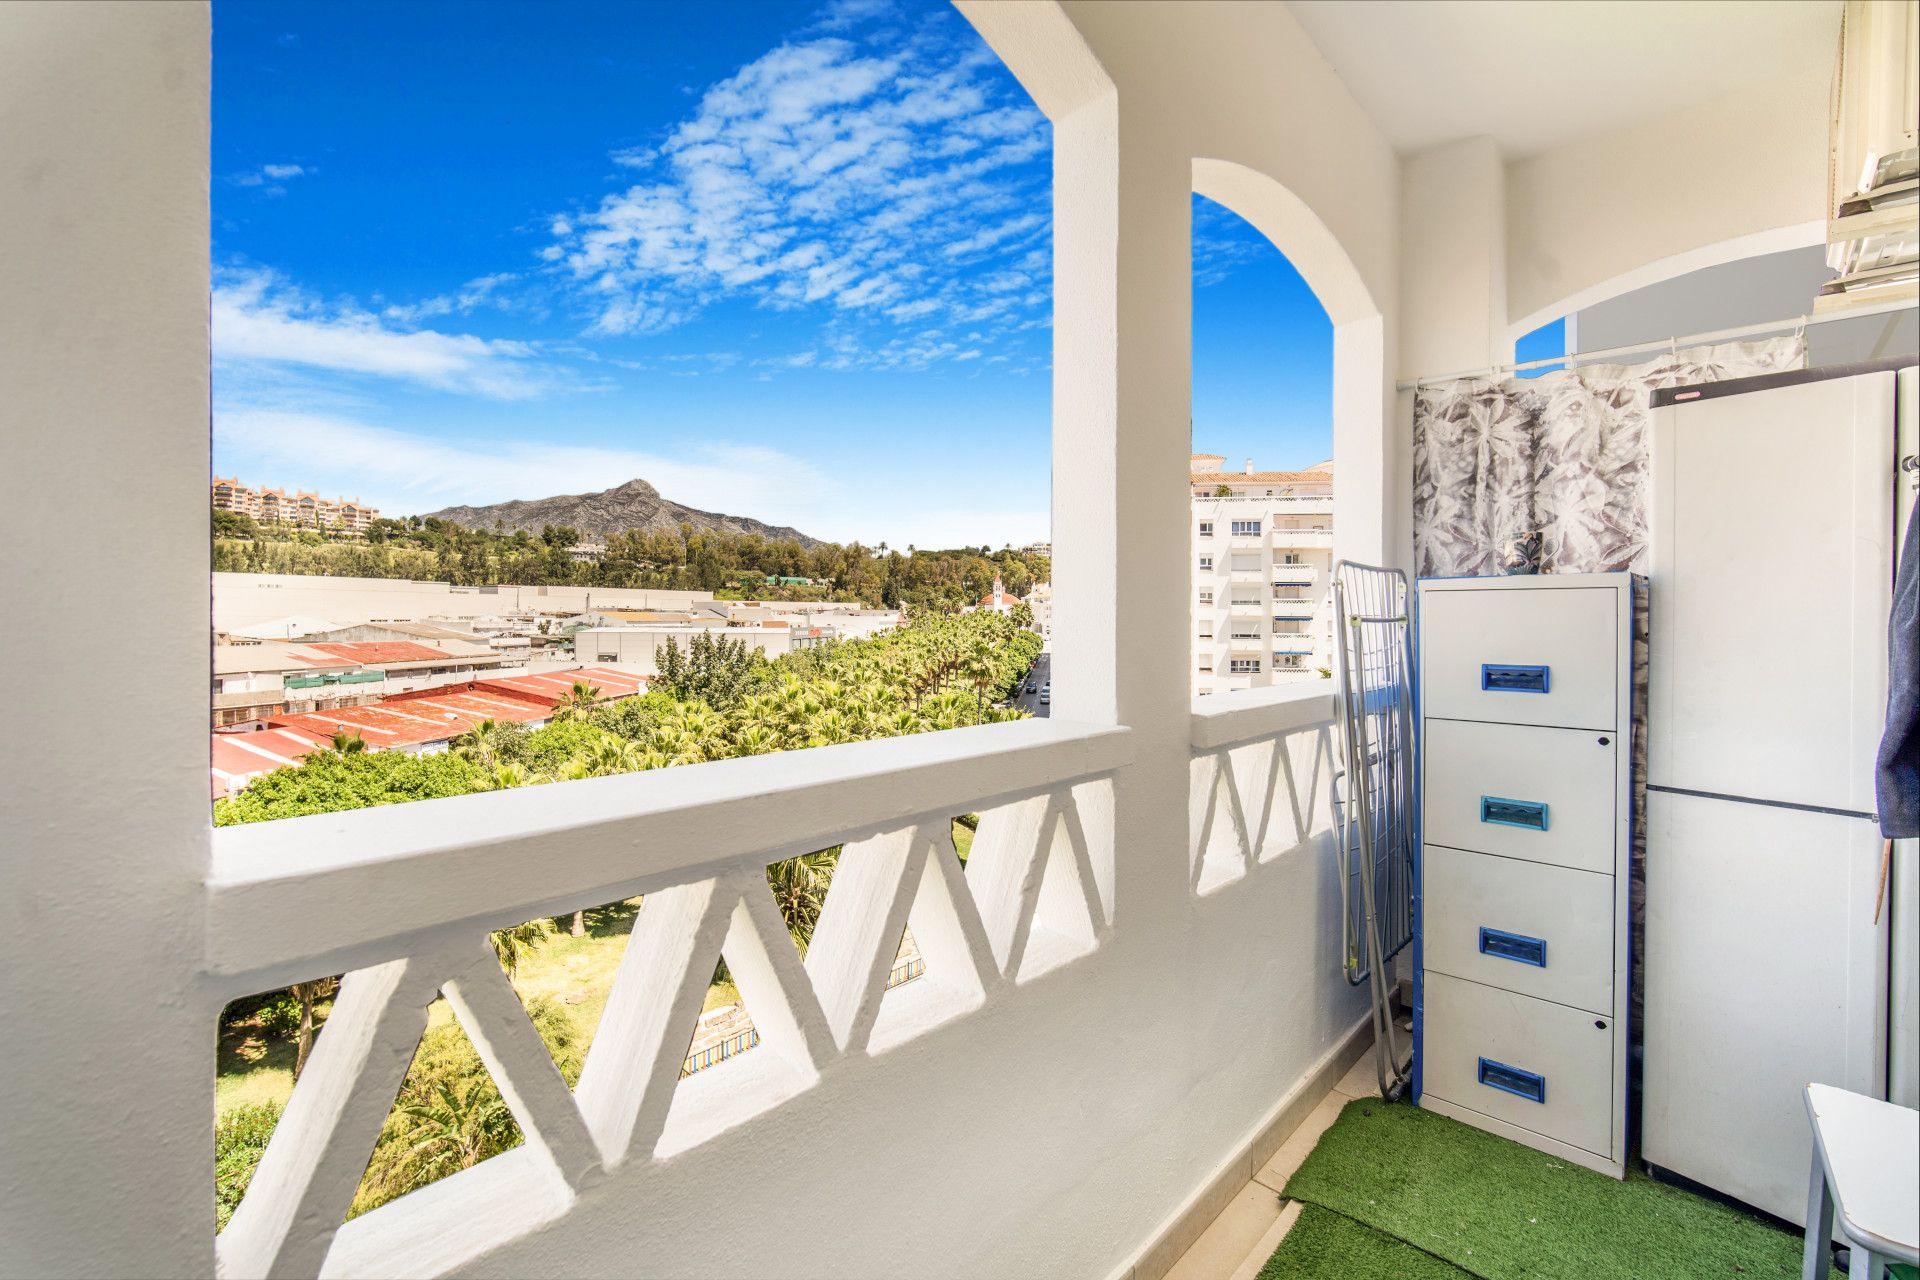 Lovely three bedroom, fifth floor apartment in the residential community of Albatross IV, La Campana